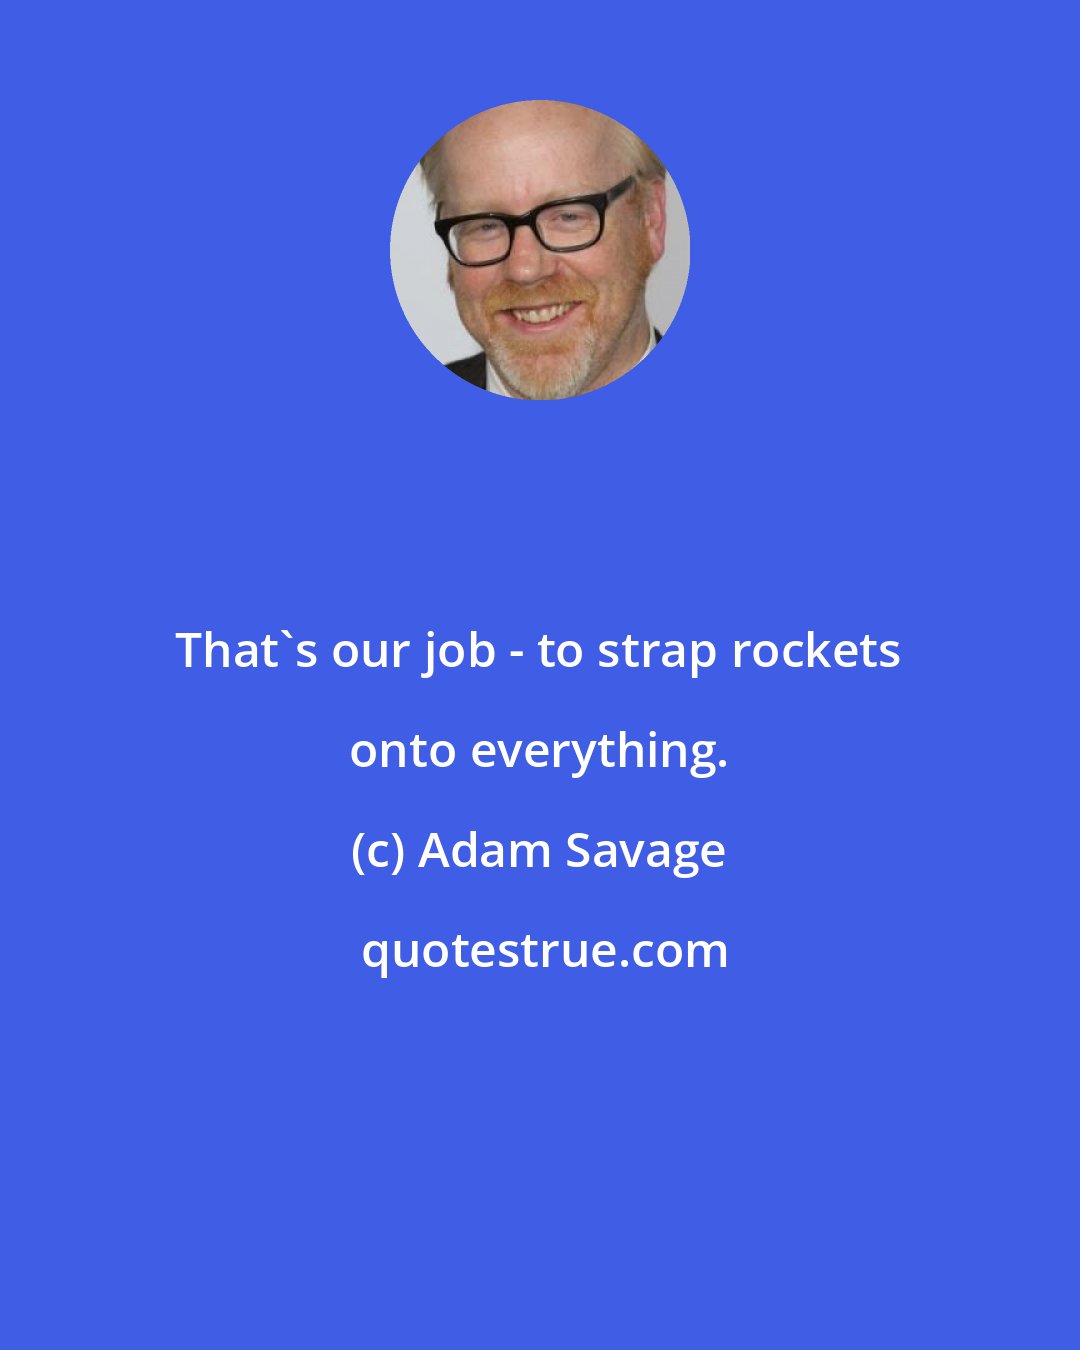 Adam Savage: That's our job - to strap rockets onto everything.